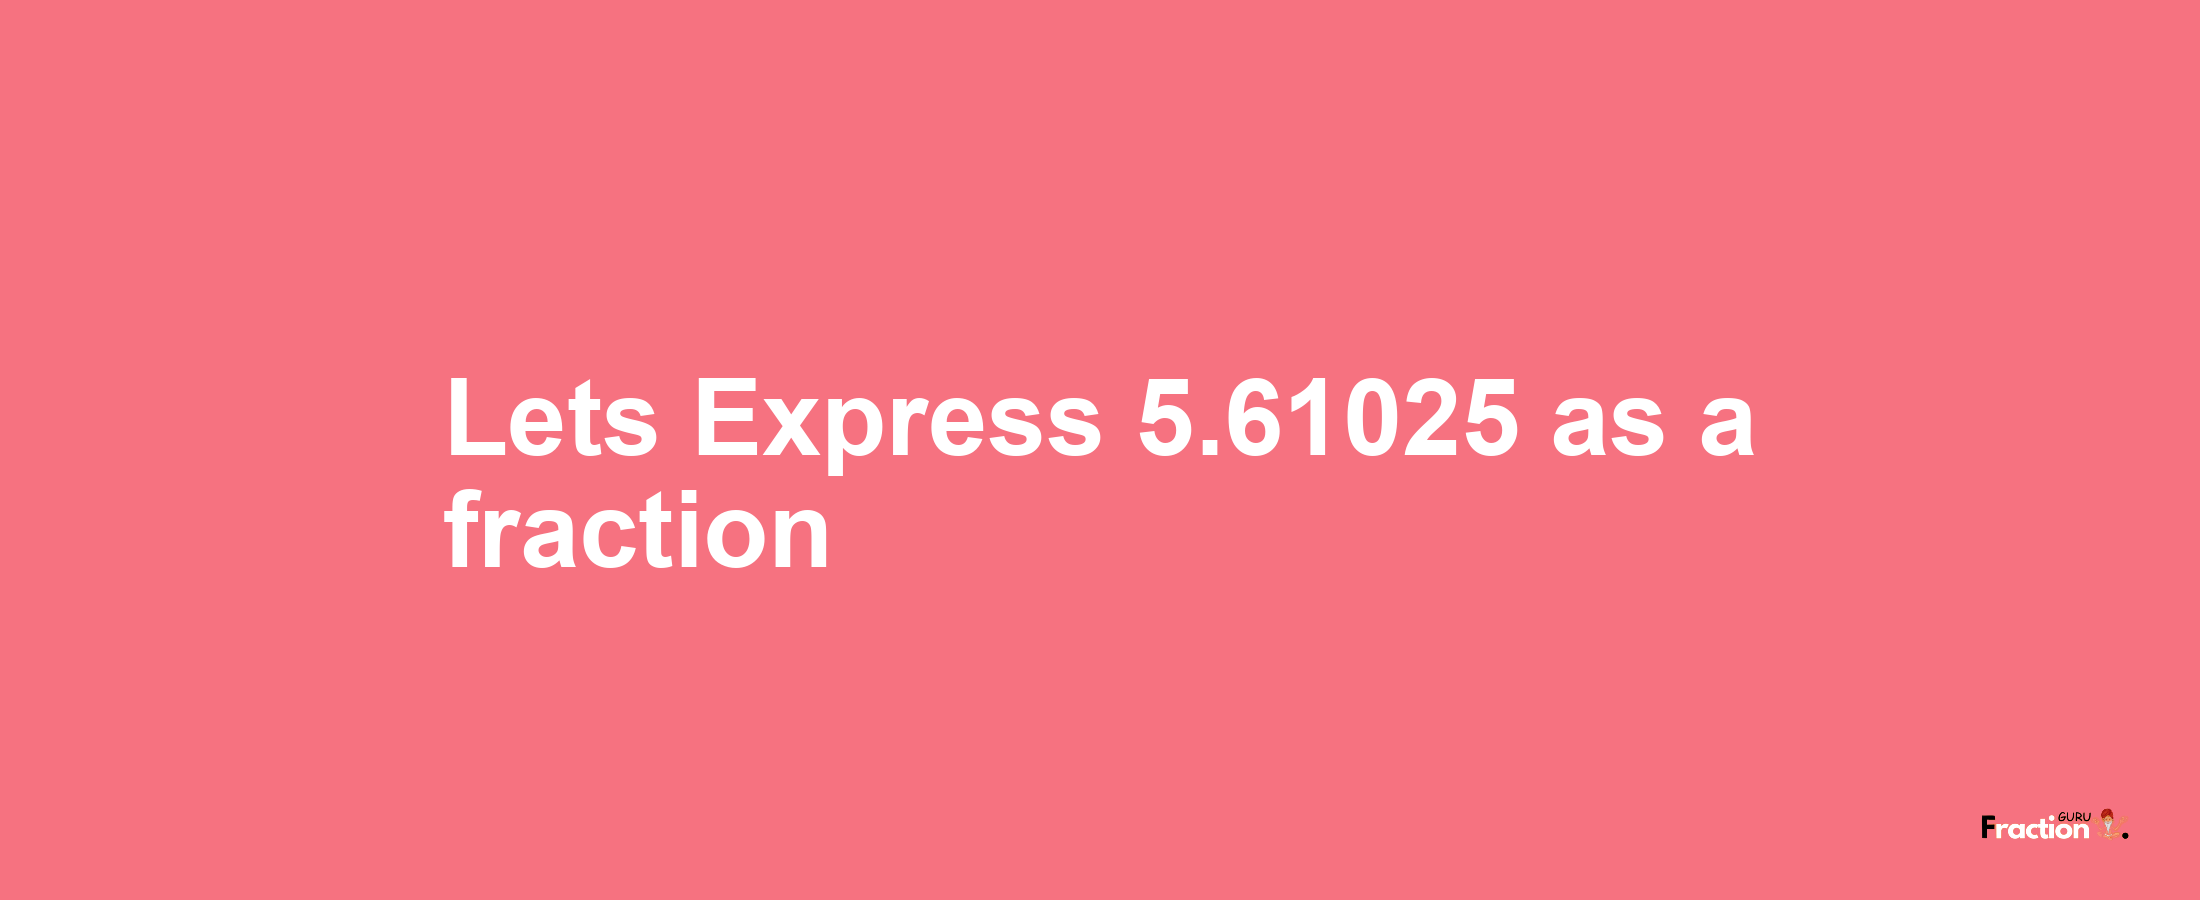 Lets Express 5.61025 as afraction